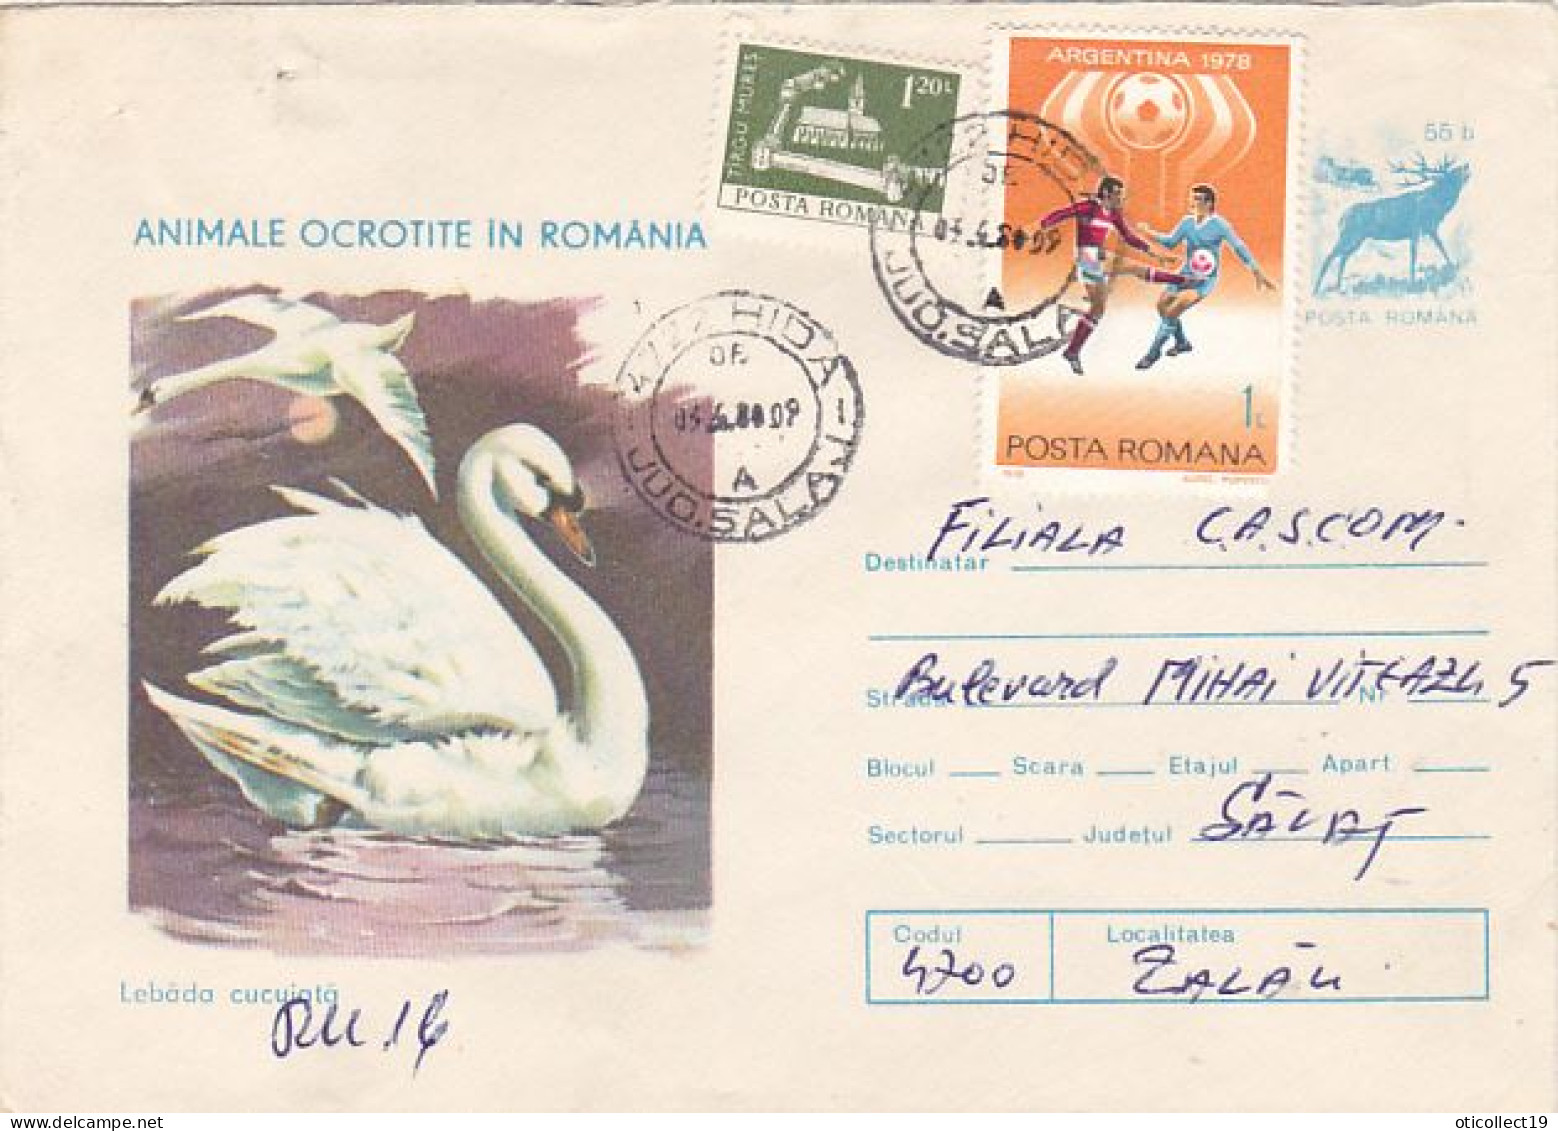 ANIMALS, BIRDS, MUTE SWAN, REGISTERED COVER STATIONERY, FINE STAMPS, 1977, ROMANIA - Swans